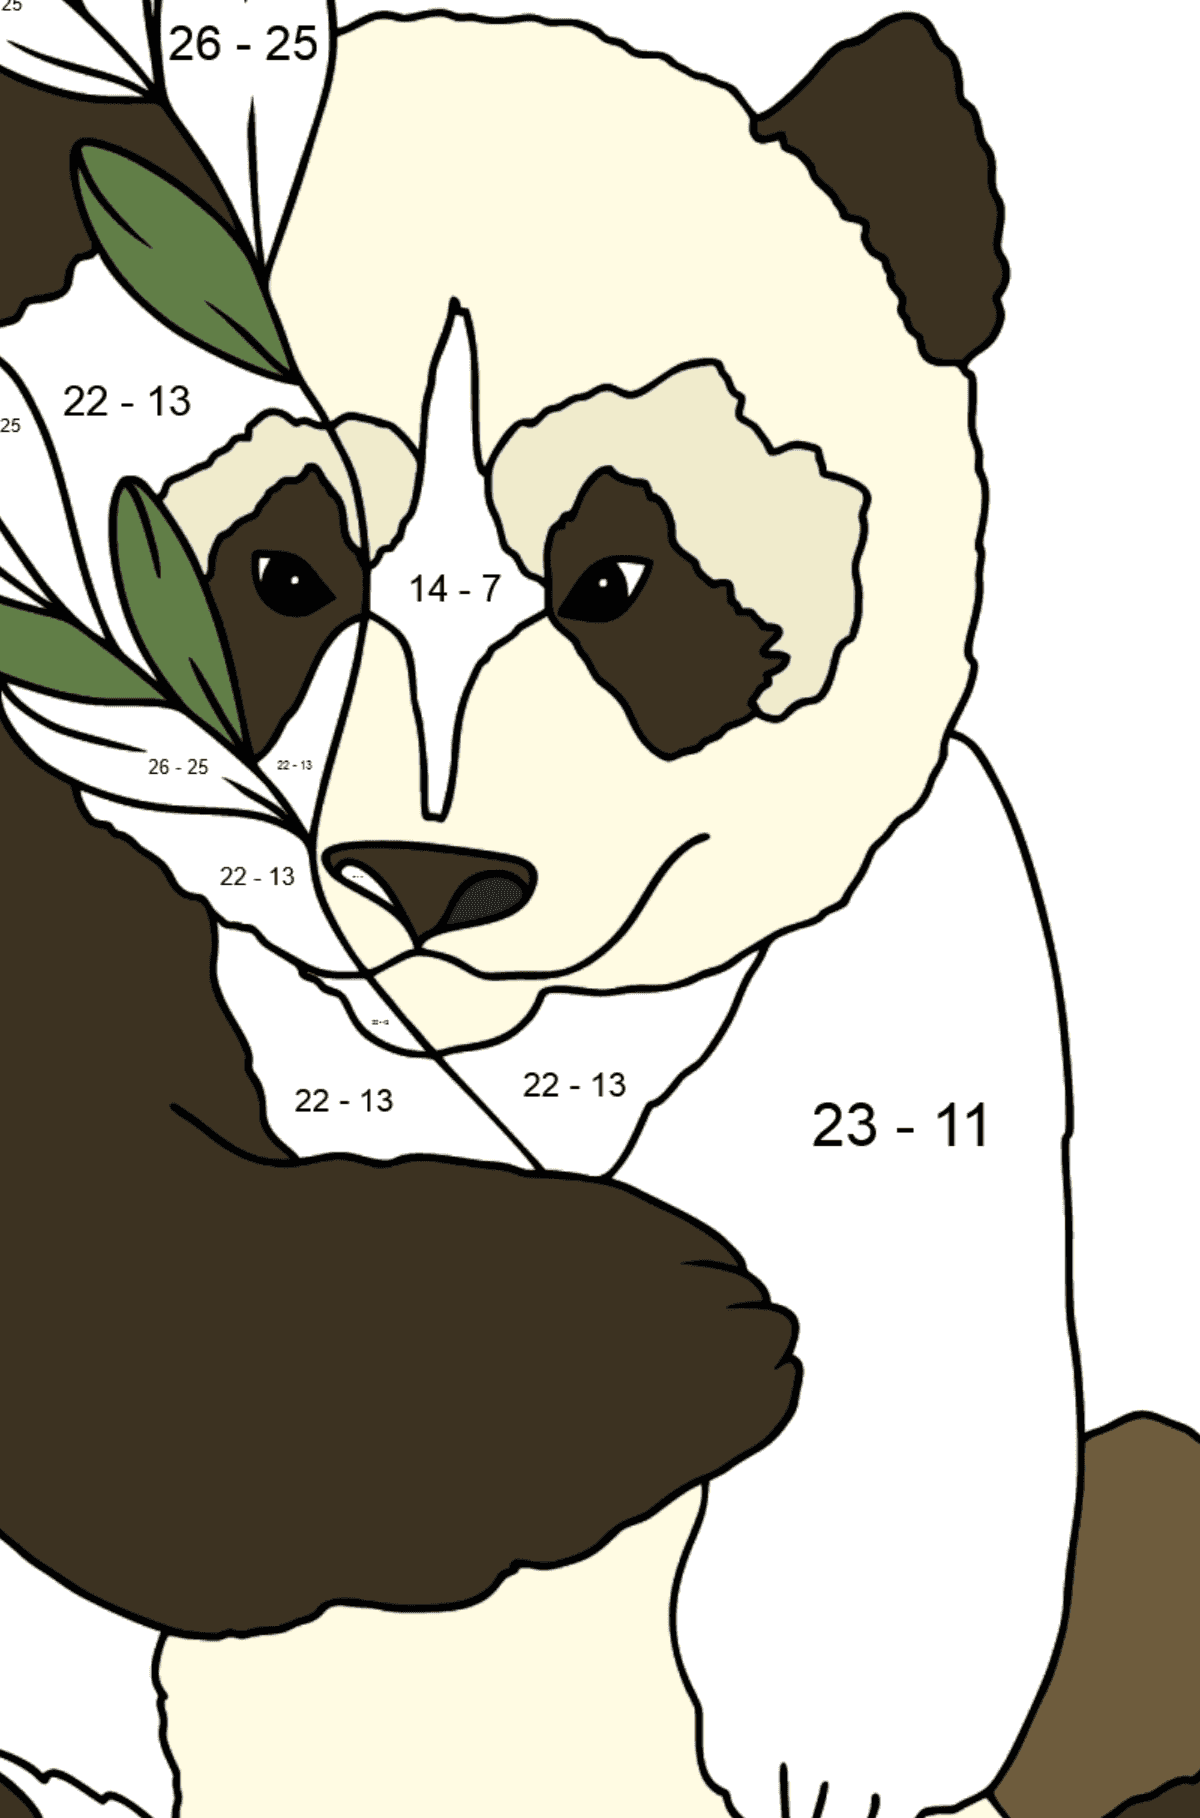 Coloring Page - A Panda is Having a Rest - Math Coloring - Subtraction for Kids